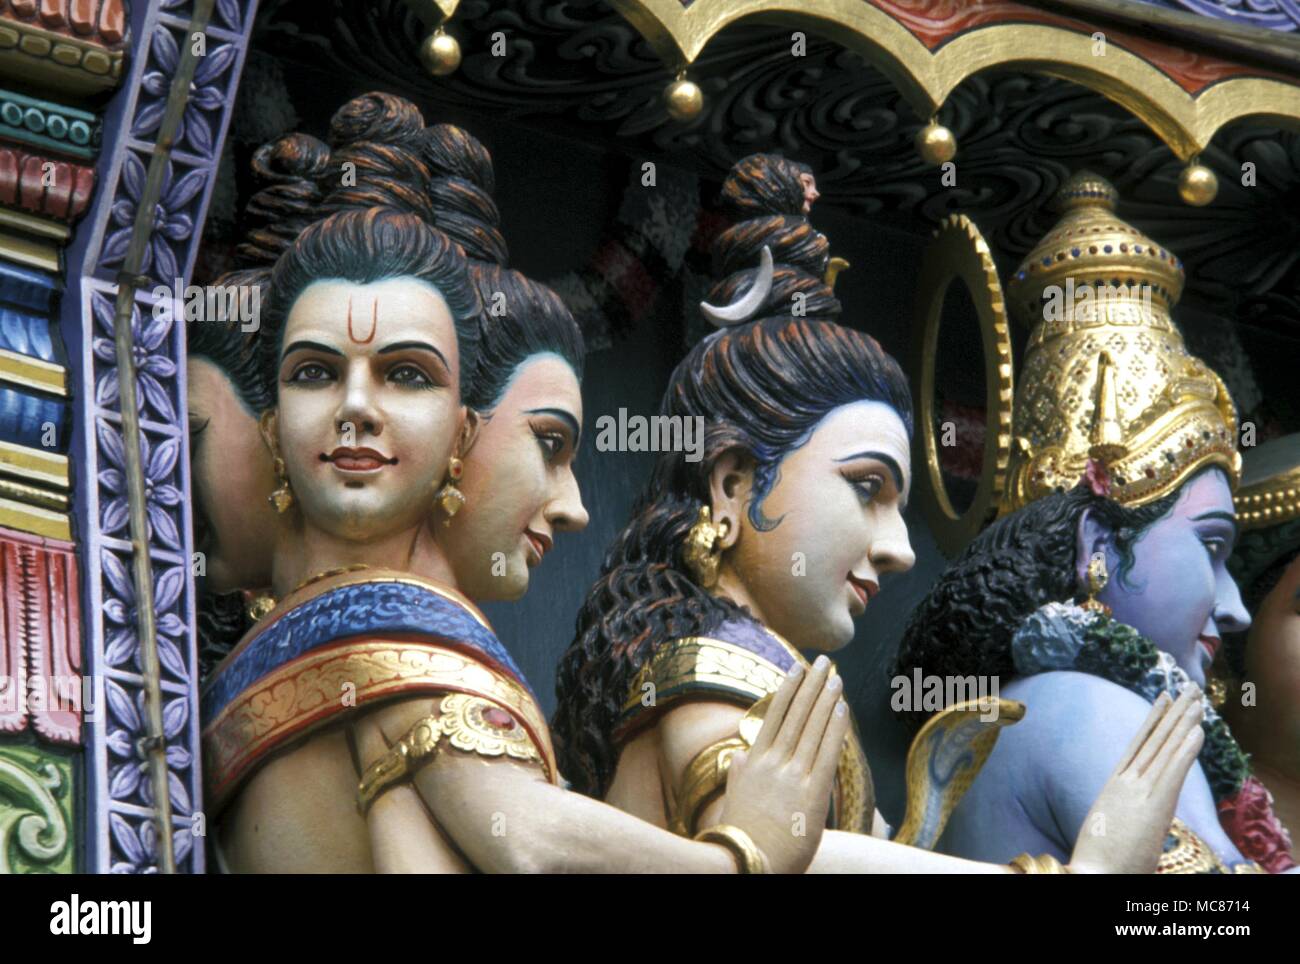 THIRD EYE - Thrd eye marking, in crescent form, on the head of a multi-headed Hindu statue on a Temple in Singapore Stock Photo